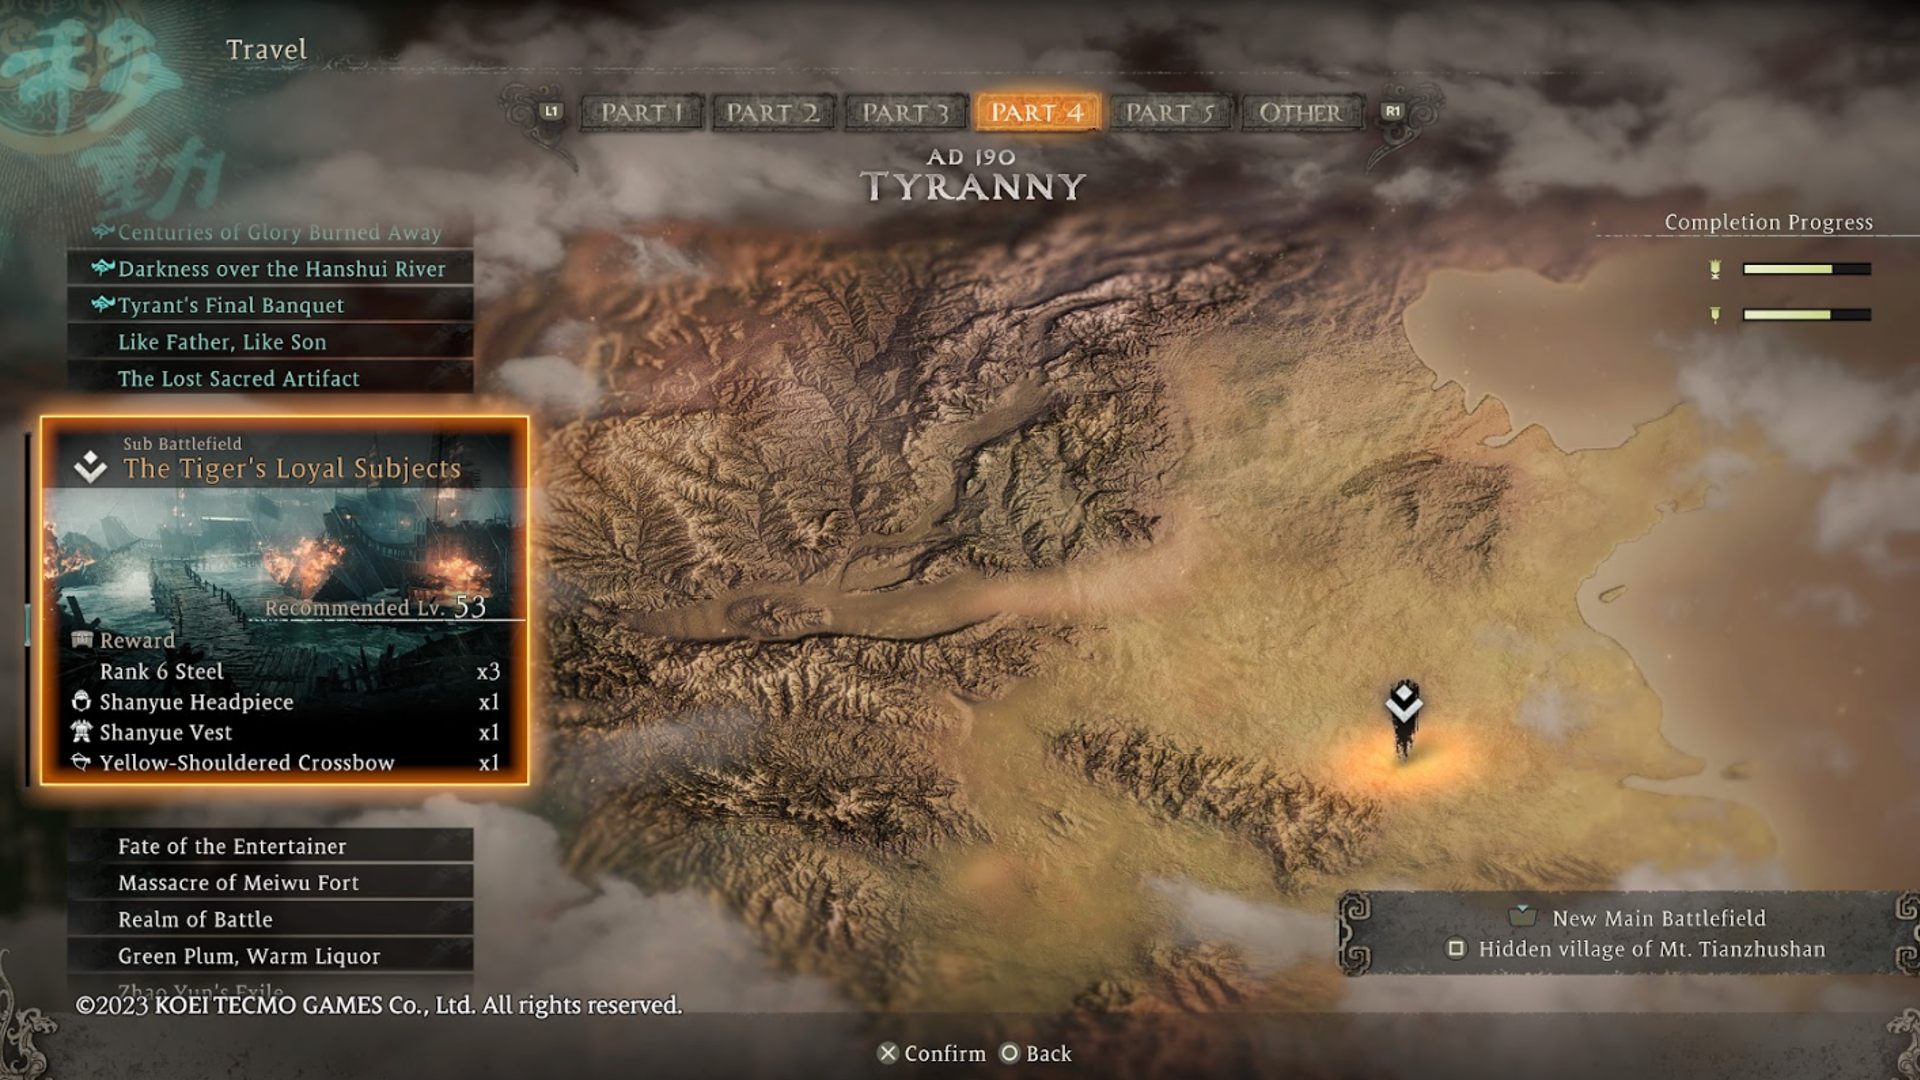 Wo Long Fallen Dynasty Level Up: The map can be seen